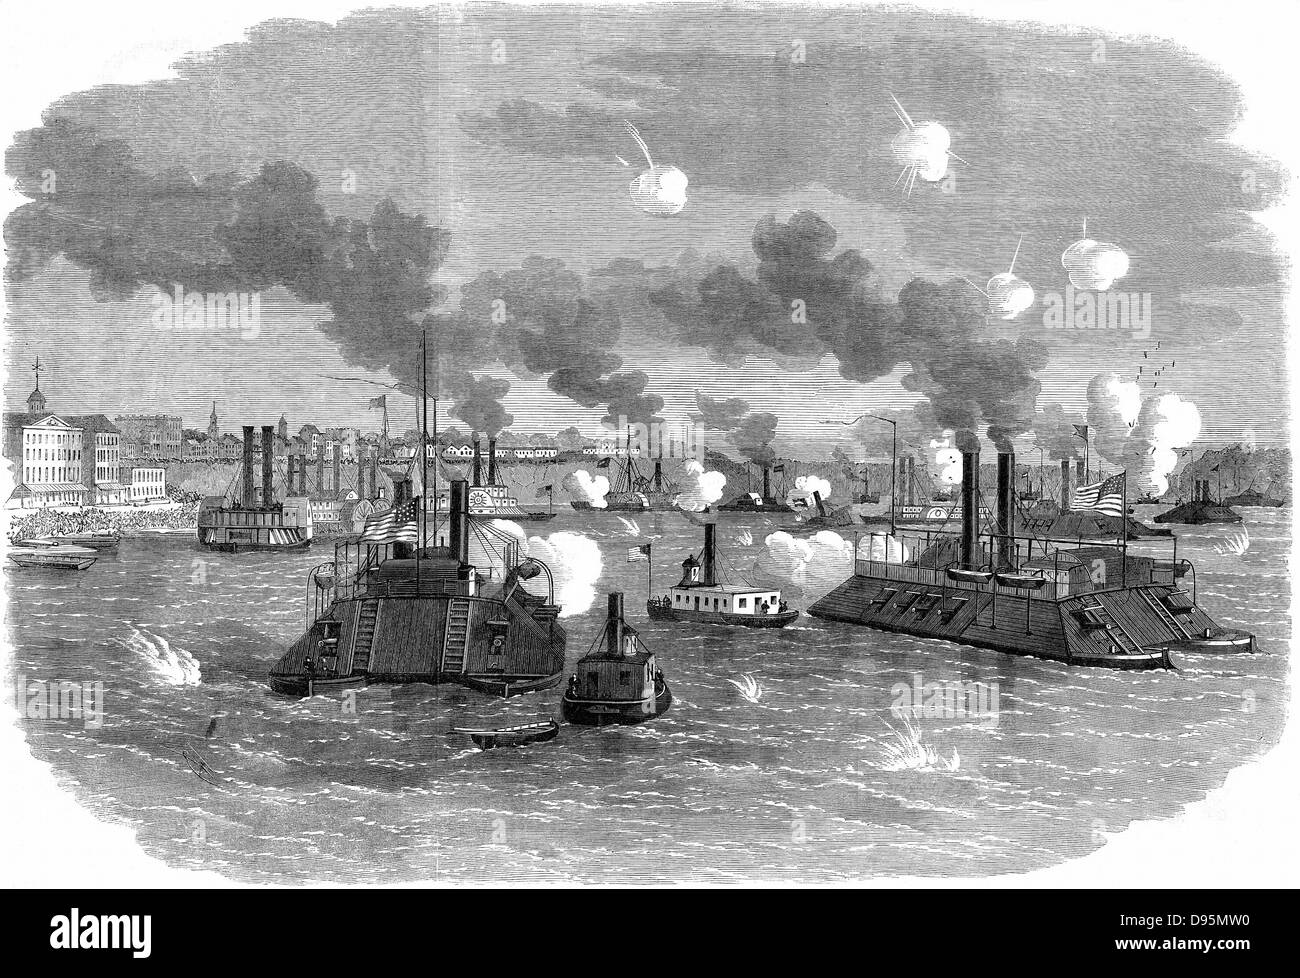 American Civil War 1861-1865: Destruction of the Confederate (Southern) flotilla by Unionist armoured gunboats at Memphis, Tennessee, July 1862. Wood engraving. Stock Photo